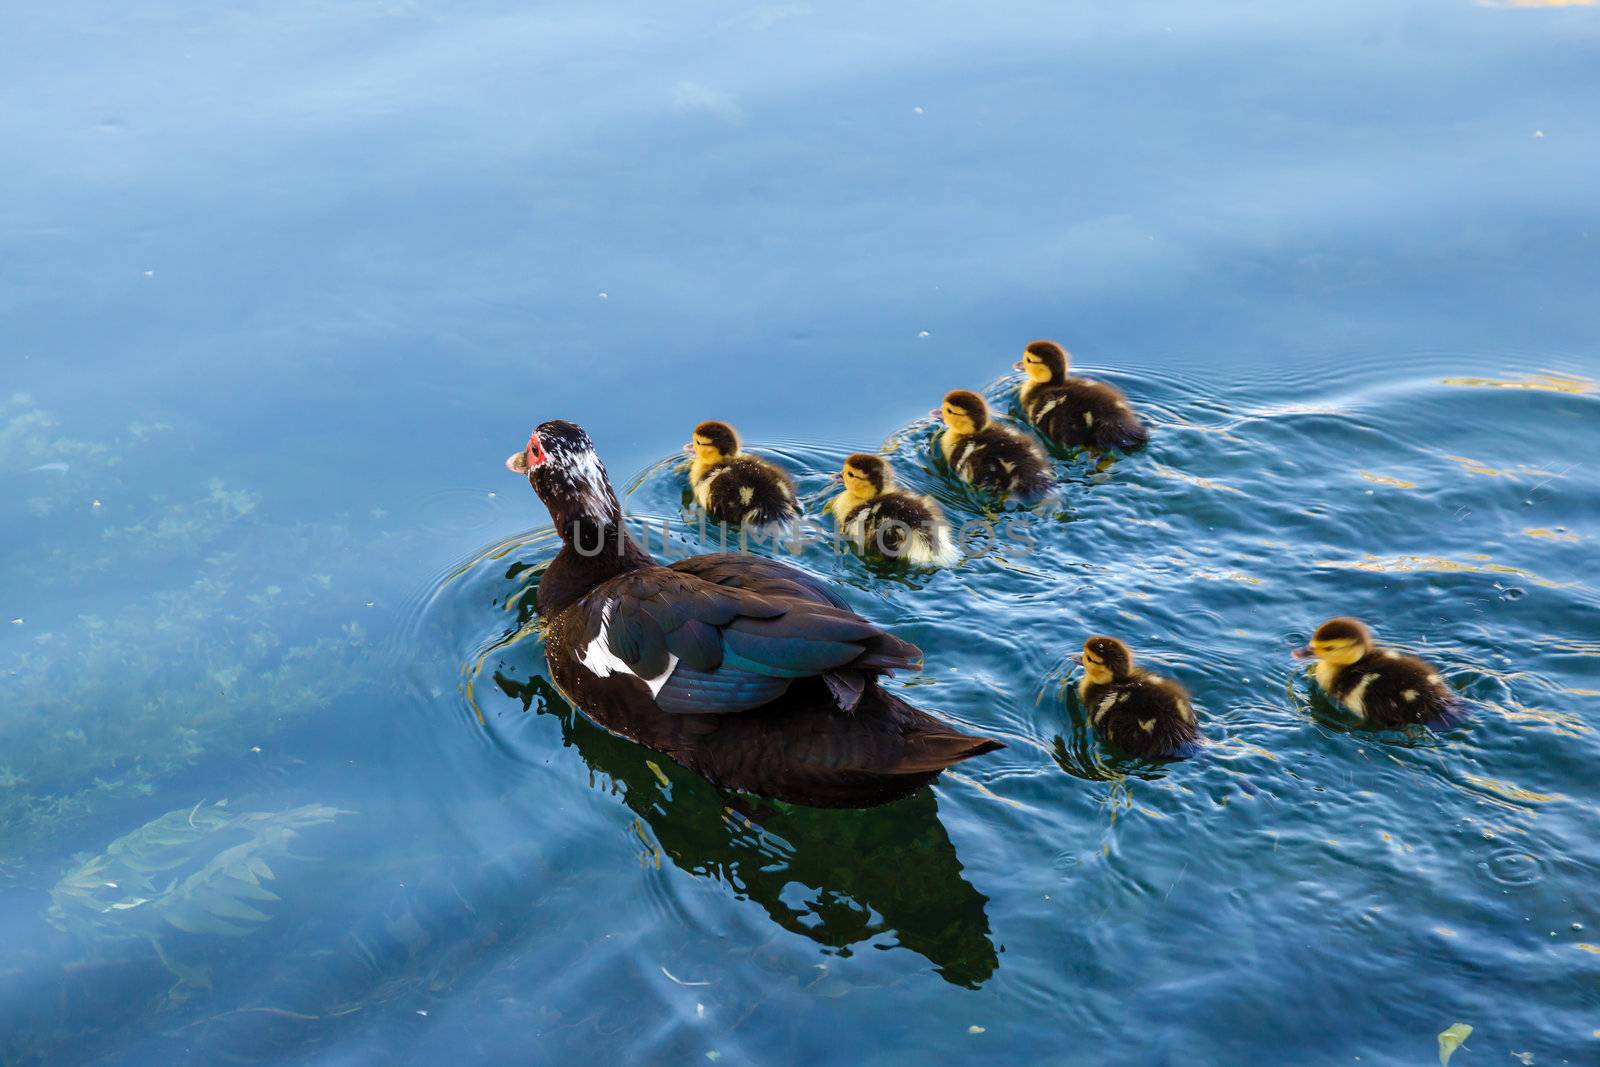 Duck and Baby Ducklings in the Water, Split, Croatia by anshar